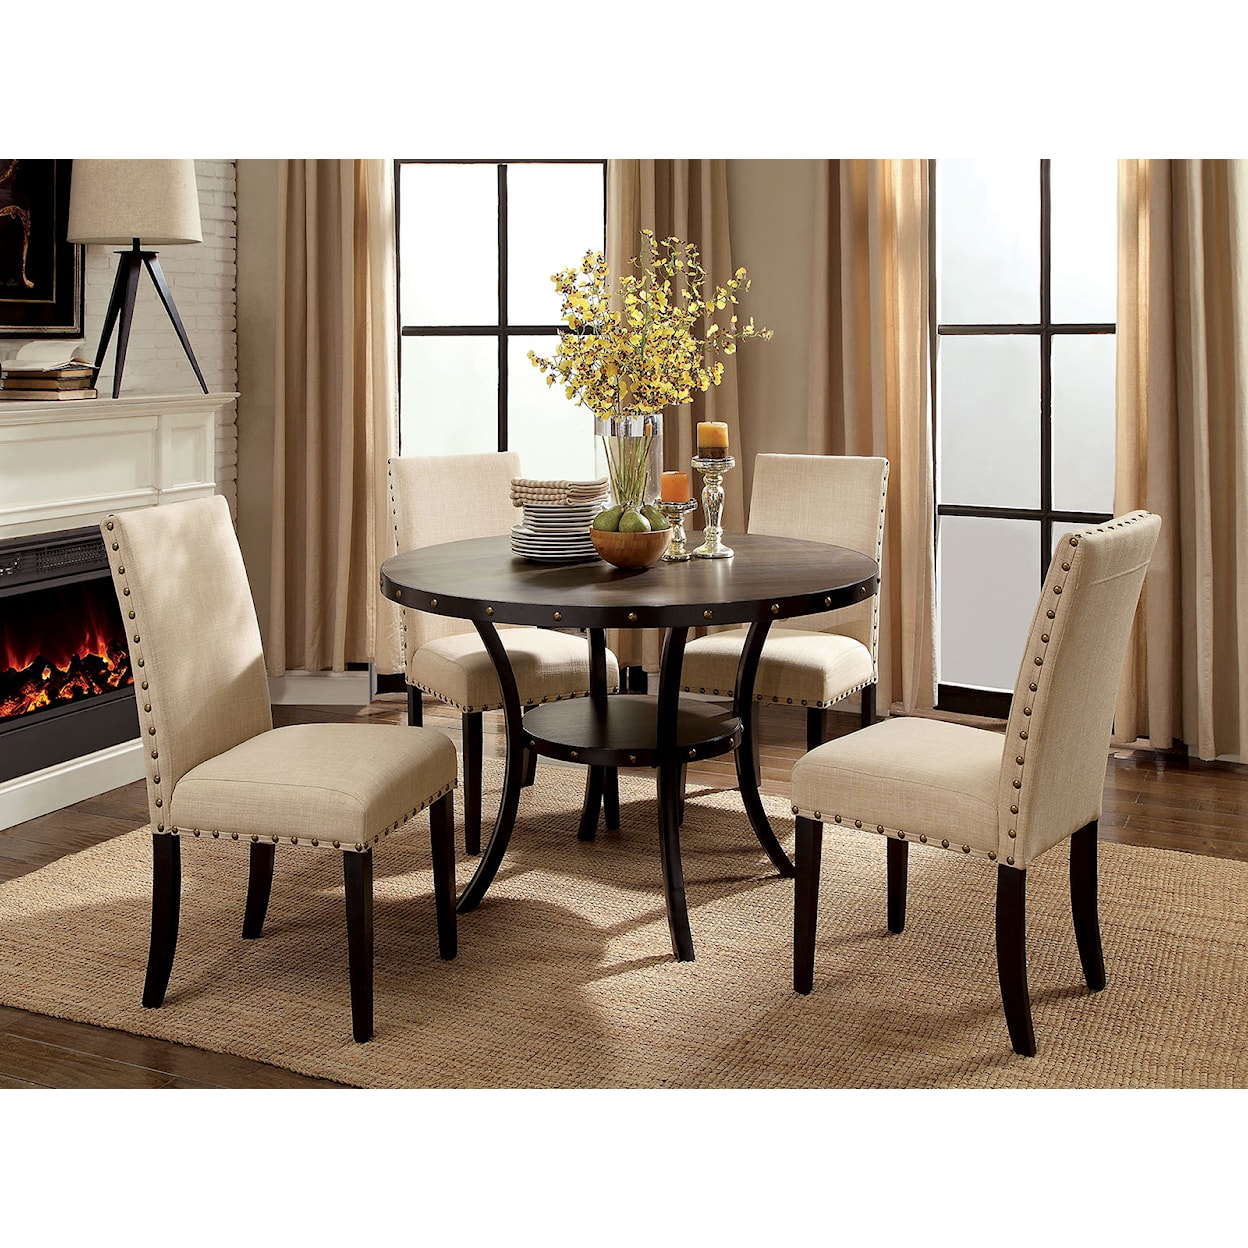 Furniture of America Kaitlin 5-Piece Round Dining Table Set